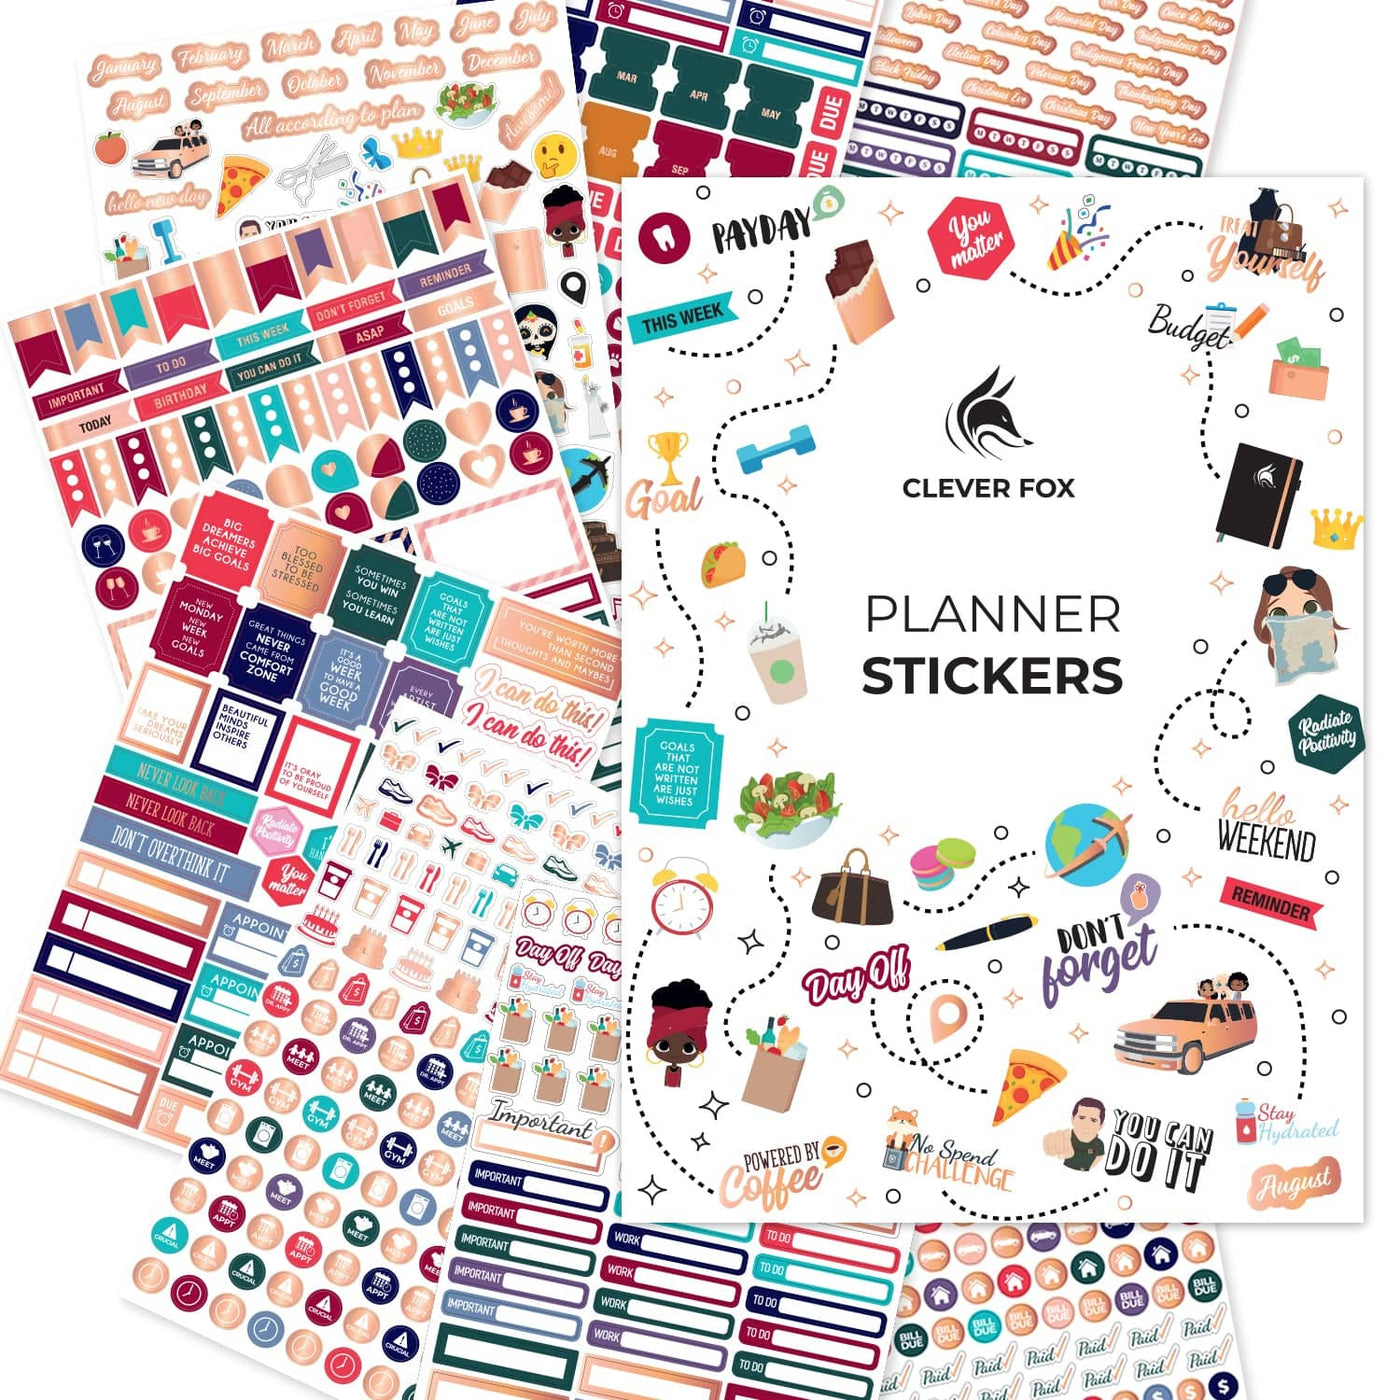 Clever Fox RNAB07HK9KDD6 planner stickers by clever fox - 1,500+  productivity, budget, fitness, mom, student, classic, number, holiday  stickers for yo